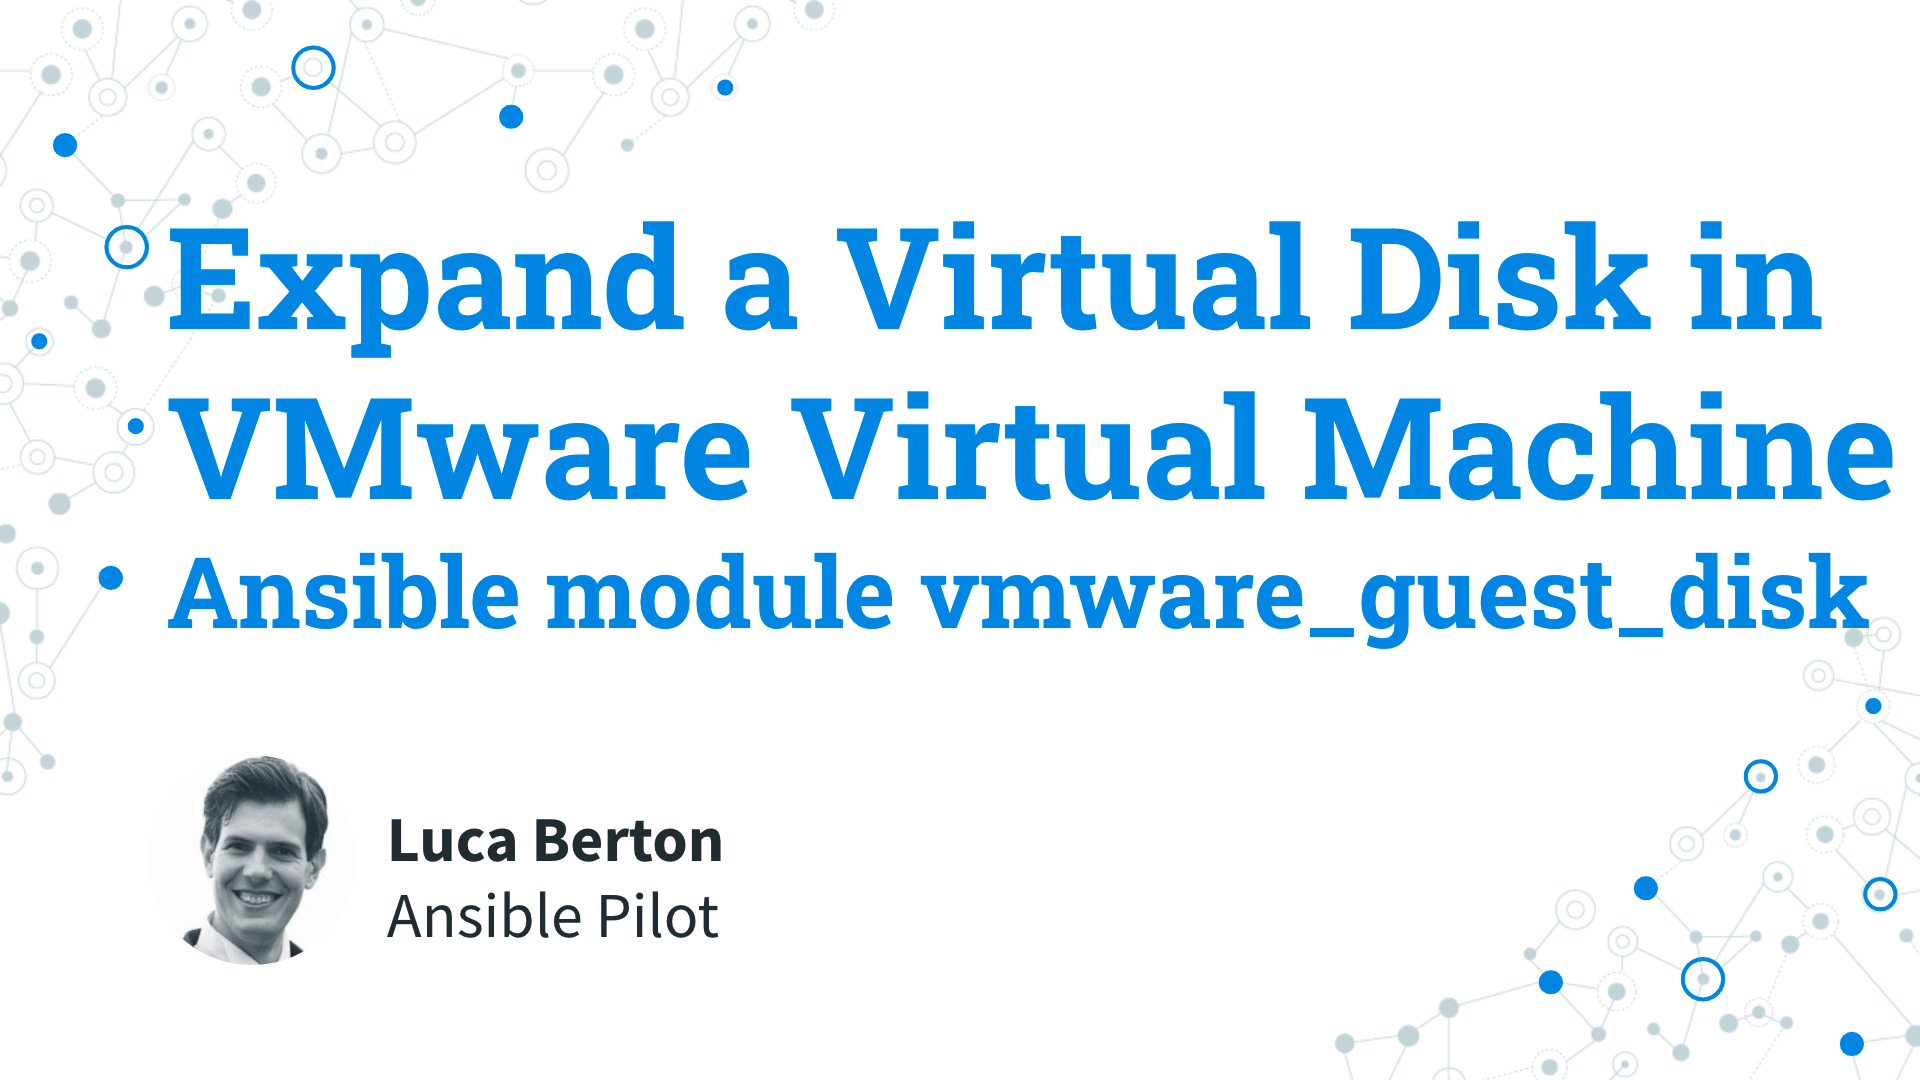 Expand a Virtual Disk in VMware vSphere Virtual Machine - Ansible module vmware_guest_disk